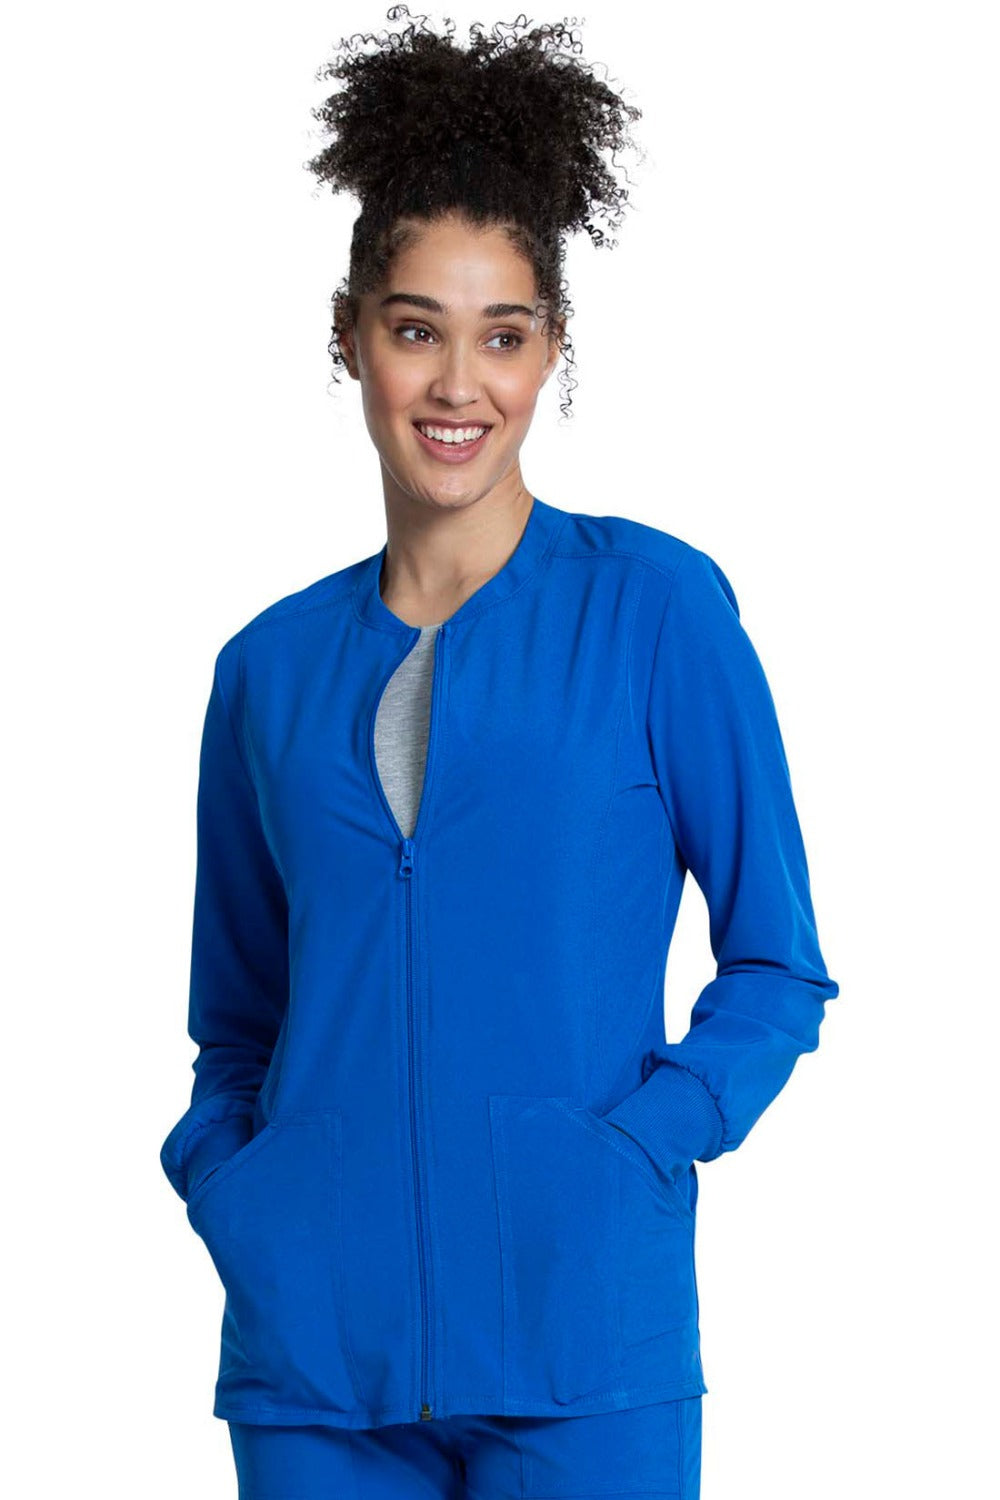 Cherokee Allura Round Neck Zipper Jacket in Royal at Parker's Clothing and Shoes.